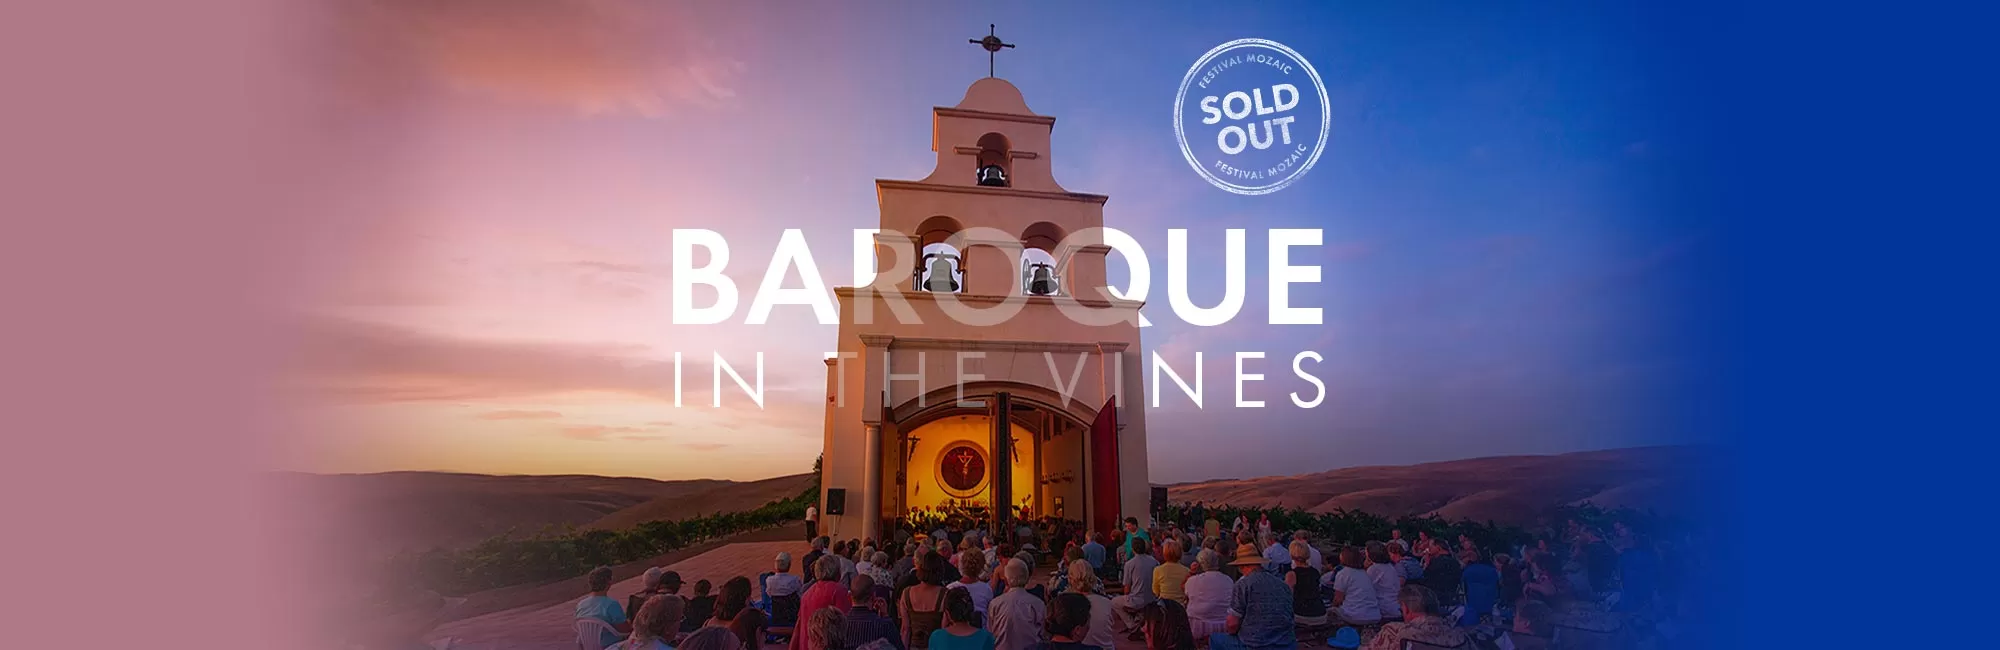 Baroque in the Vines